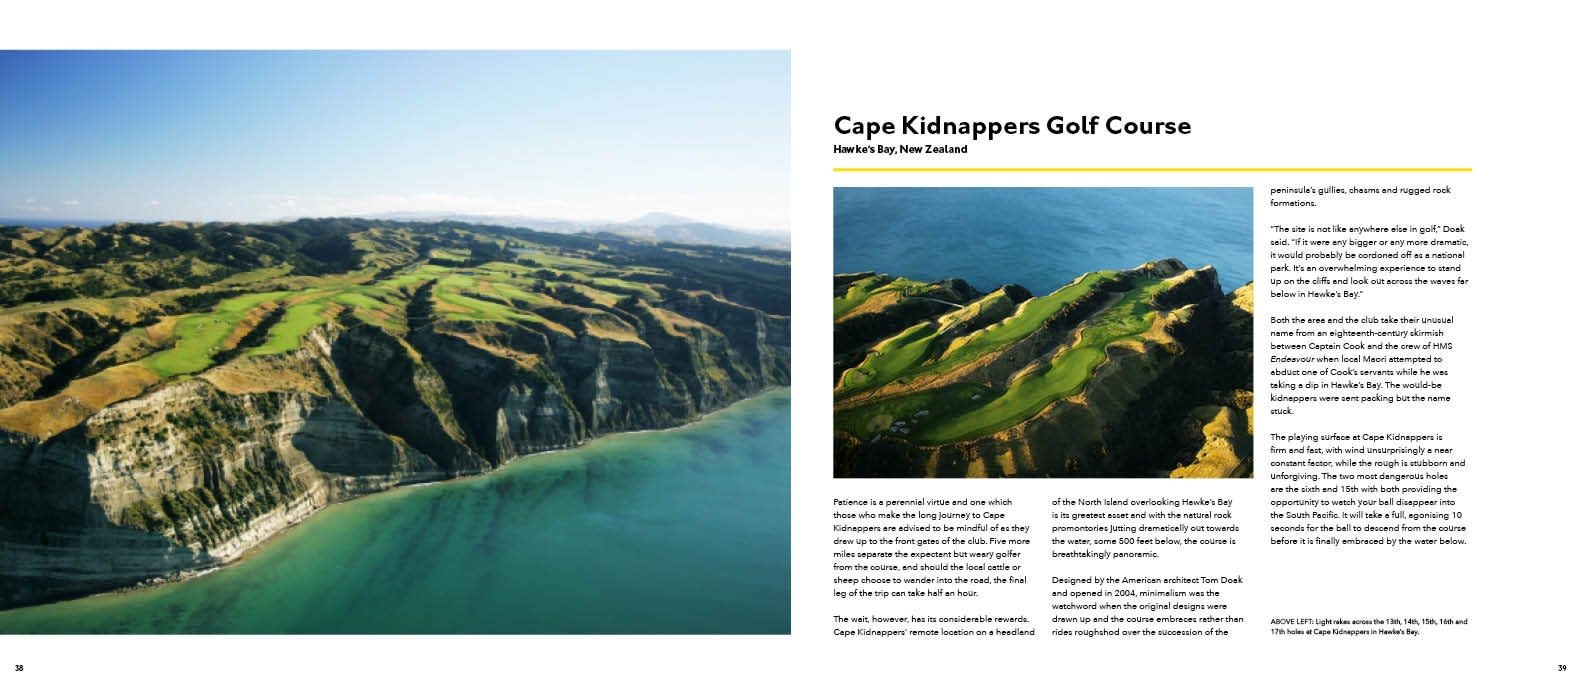 Remarkable Golf Courses-2